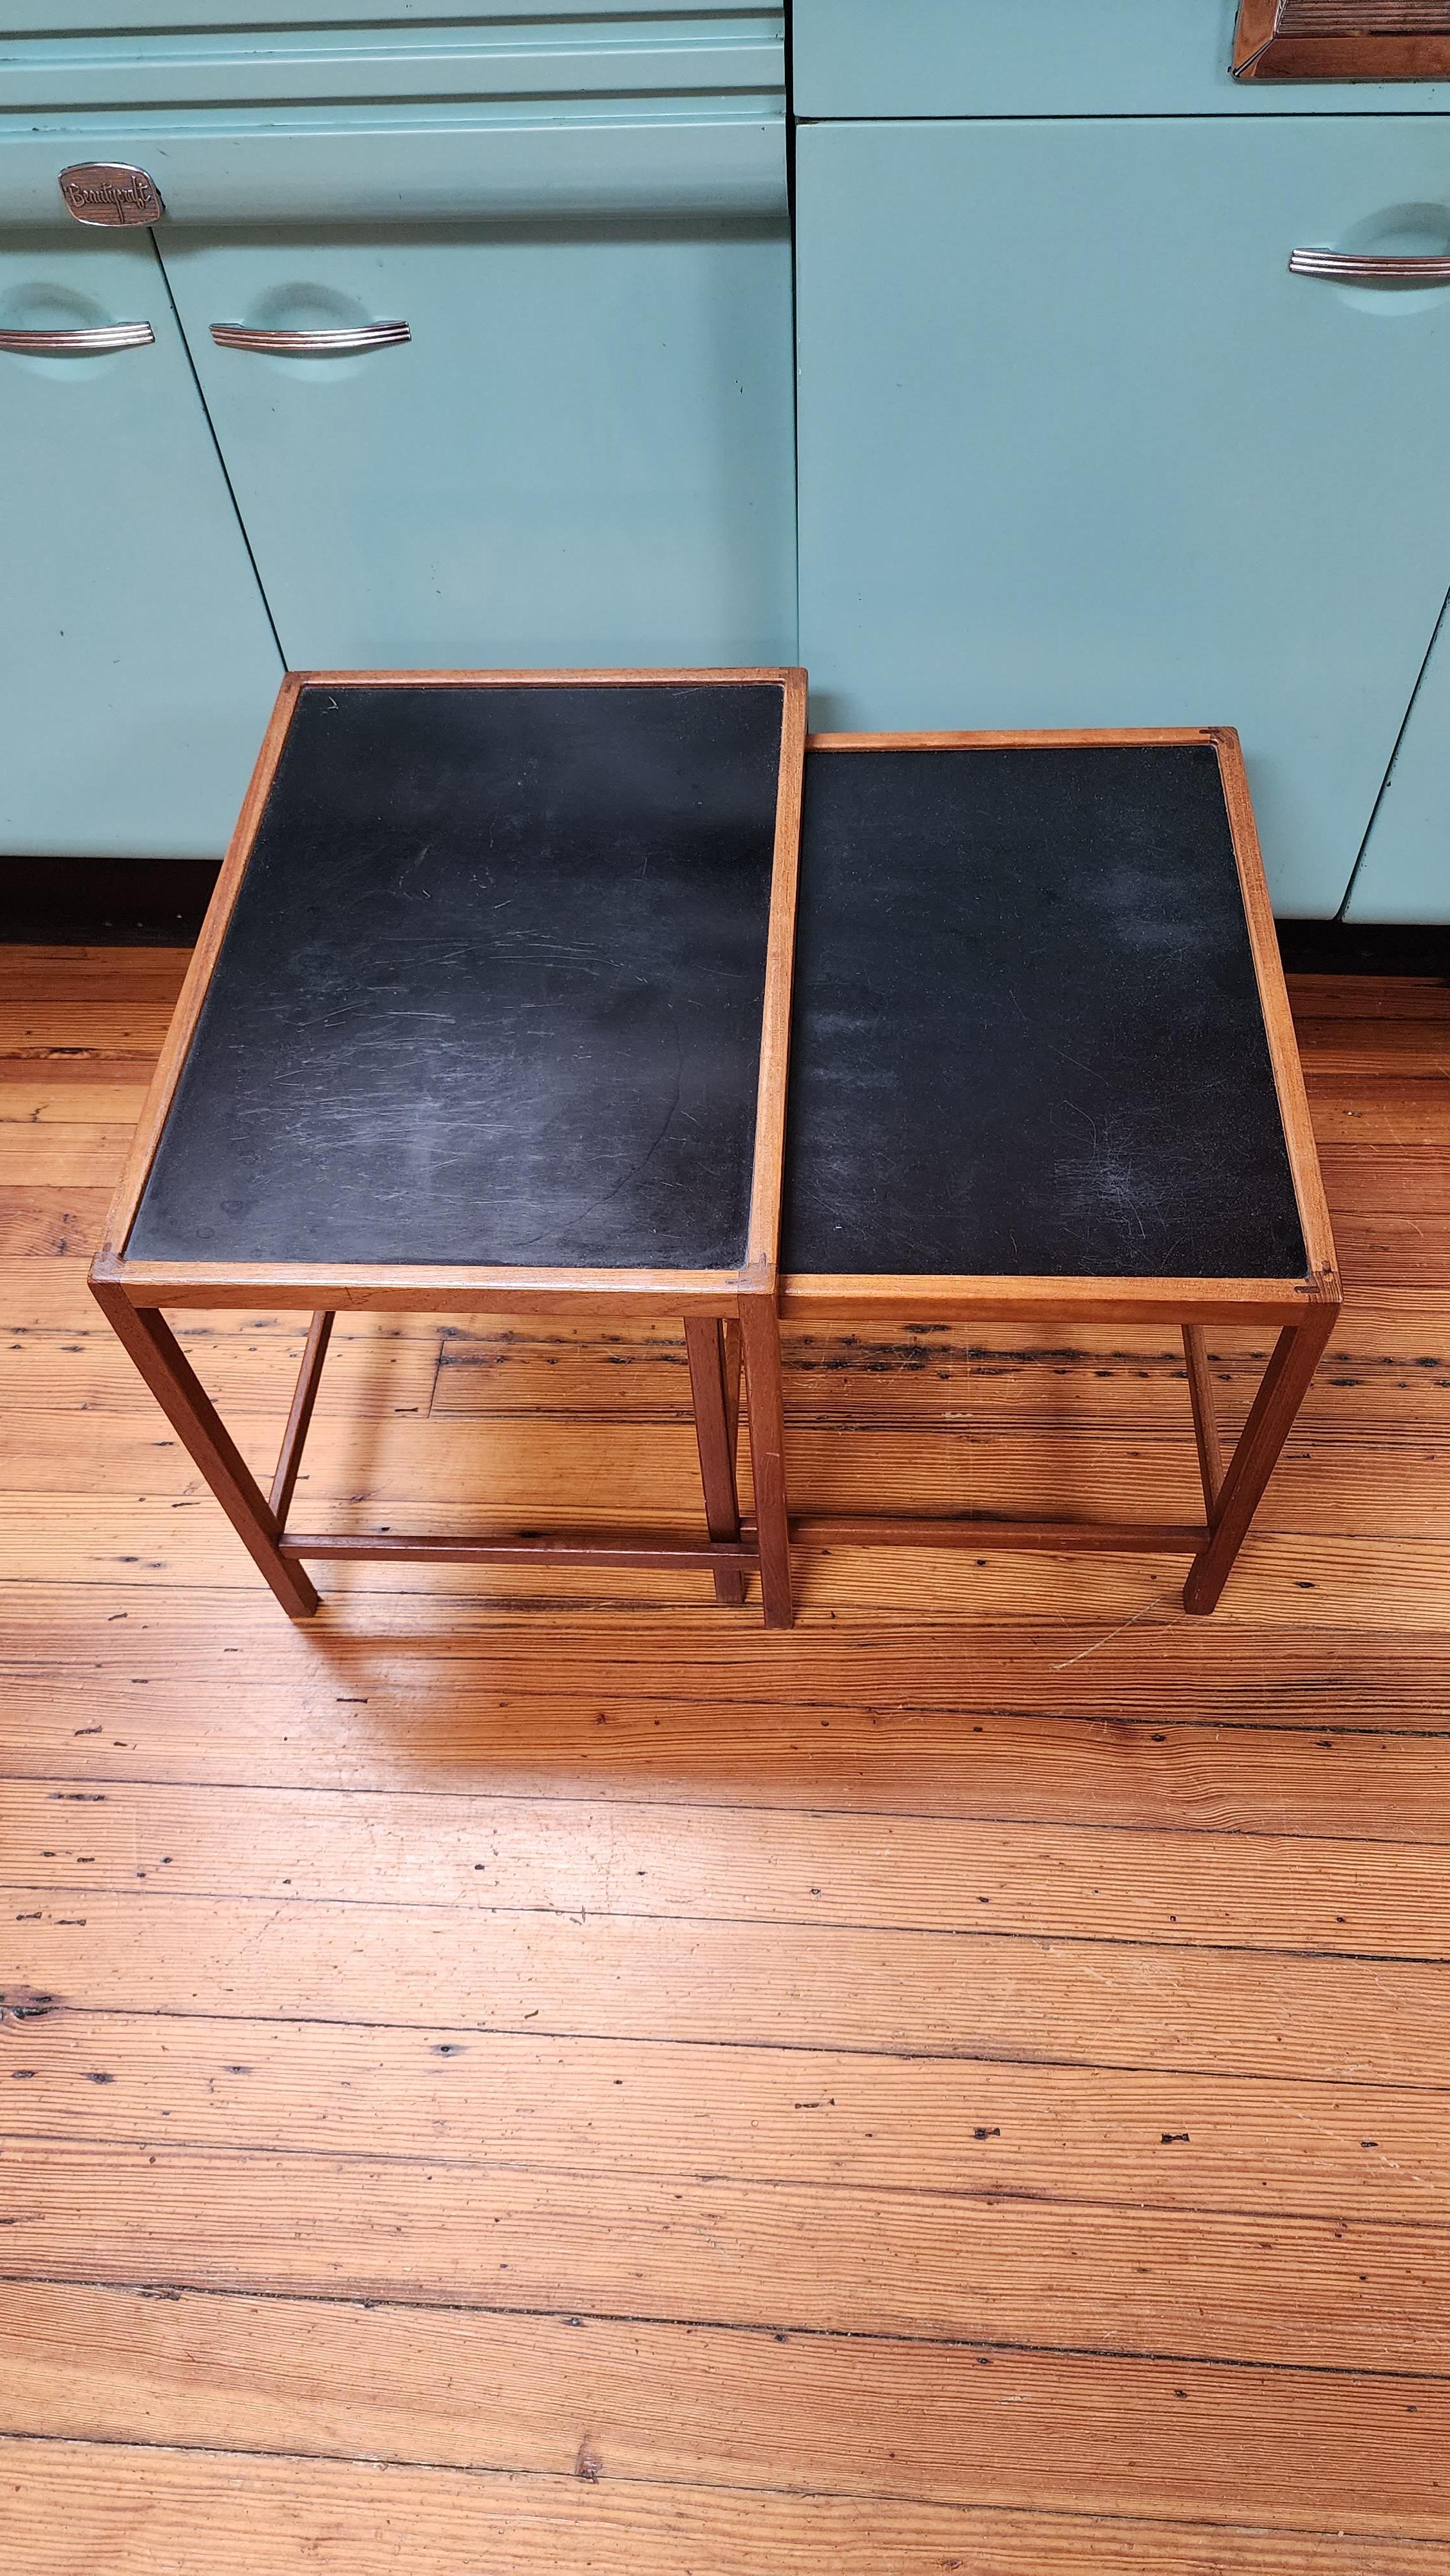 This pair of Danish teak nesting tables were designed by Kurt Ostervig in the 1950s. The corner joinery is especially well executed with a hand joined mortise and tenon style design. 
The tables nest perfectly together but slide apart easily to be